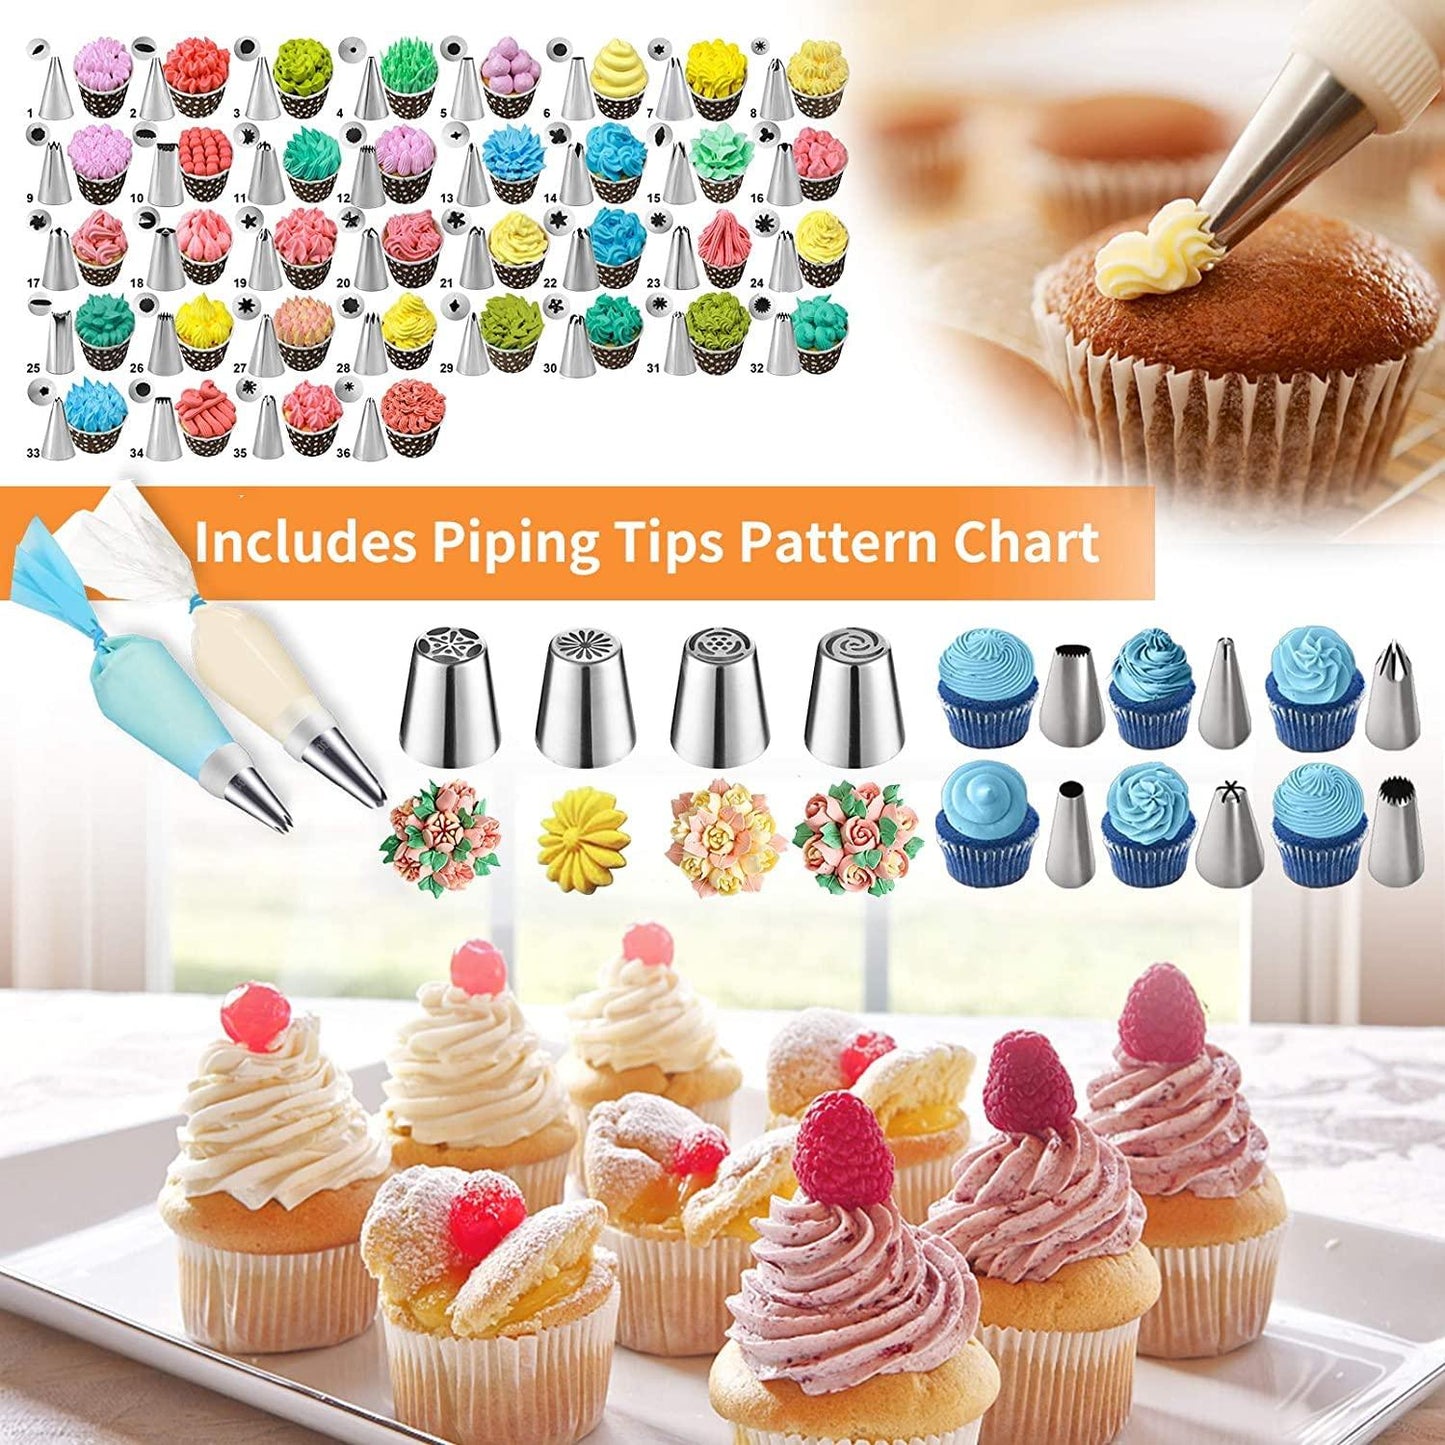 Cake Decorating Tools Supplies Kit: 236pcs Baking Accessories with Storage Case - Piping Bags and Icing Tips Set - Cupcake Cookie Frosting Fondant Bakery Set for Adults Beginners or Professional, Blue - CookCave